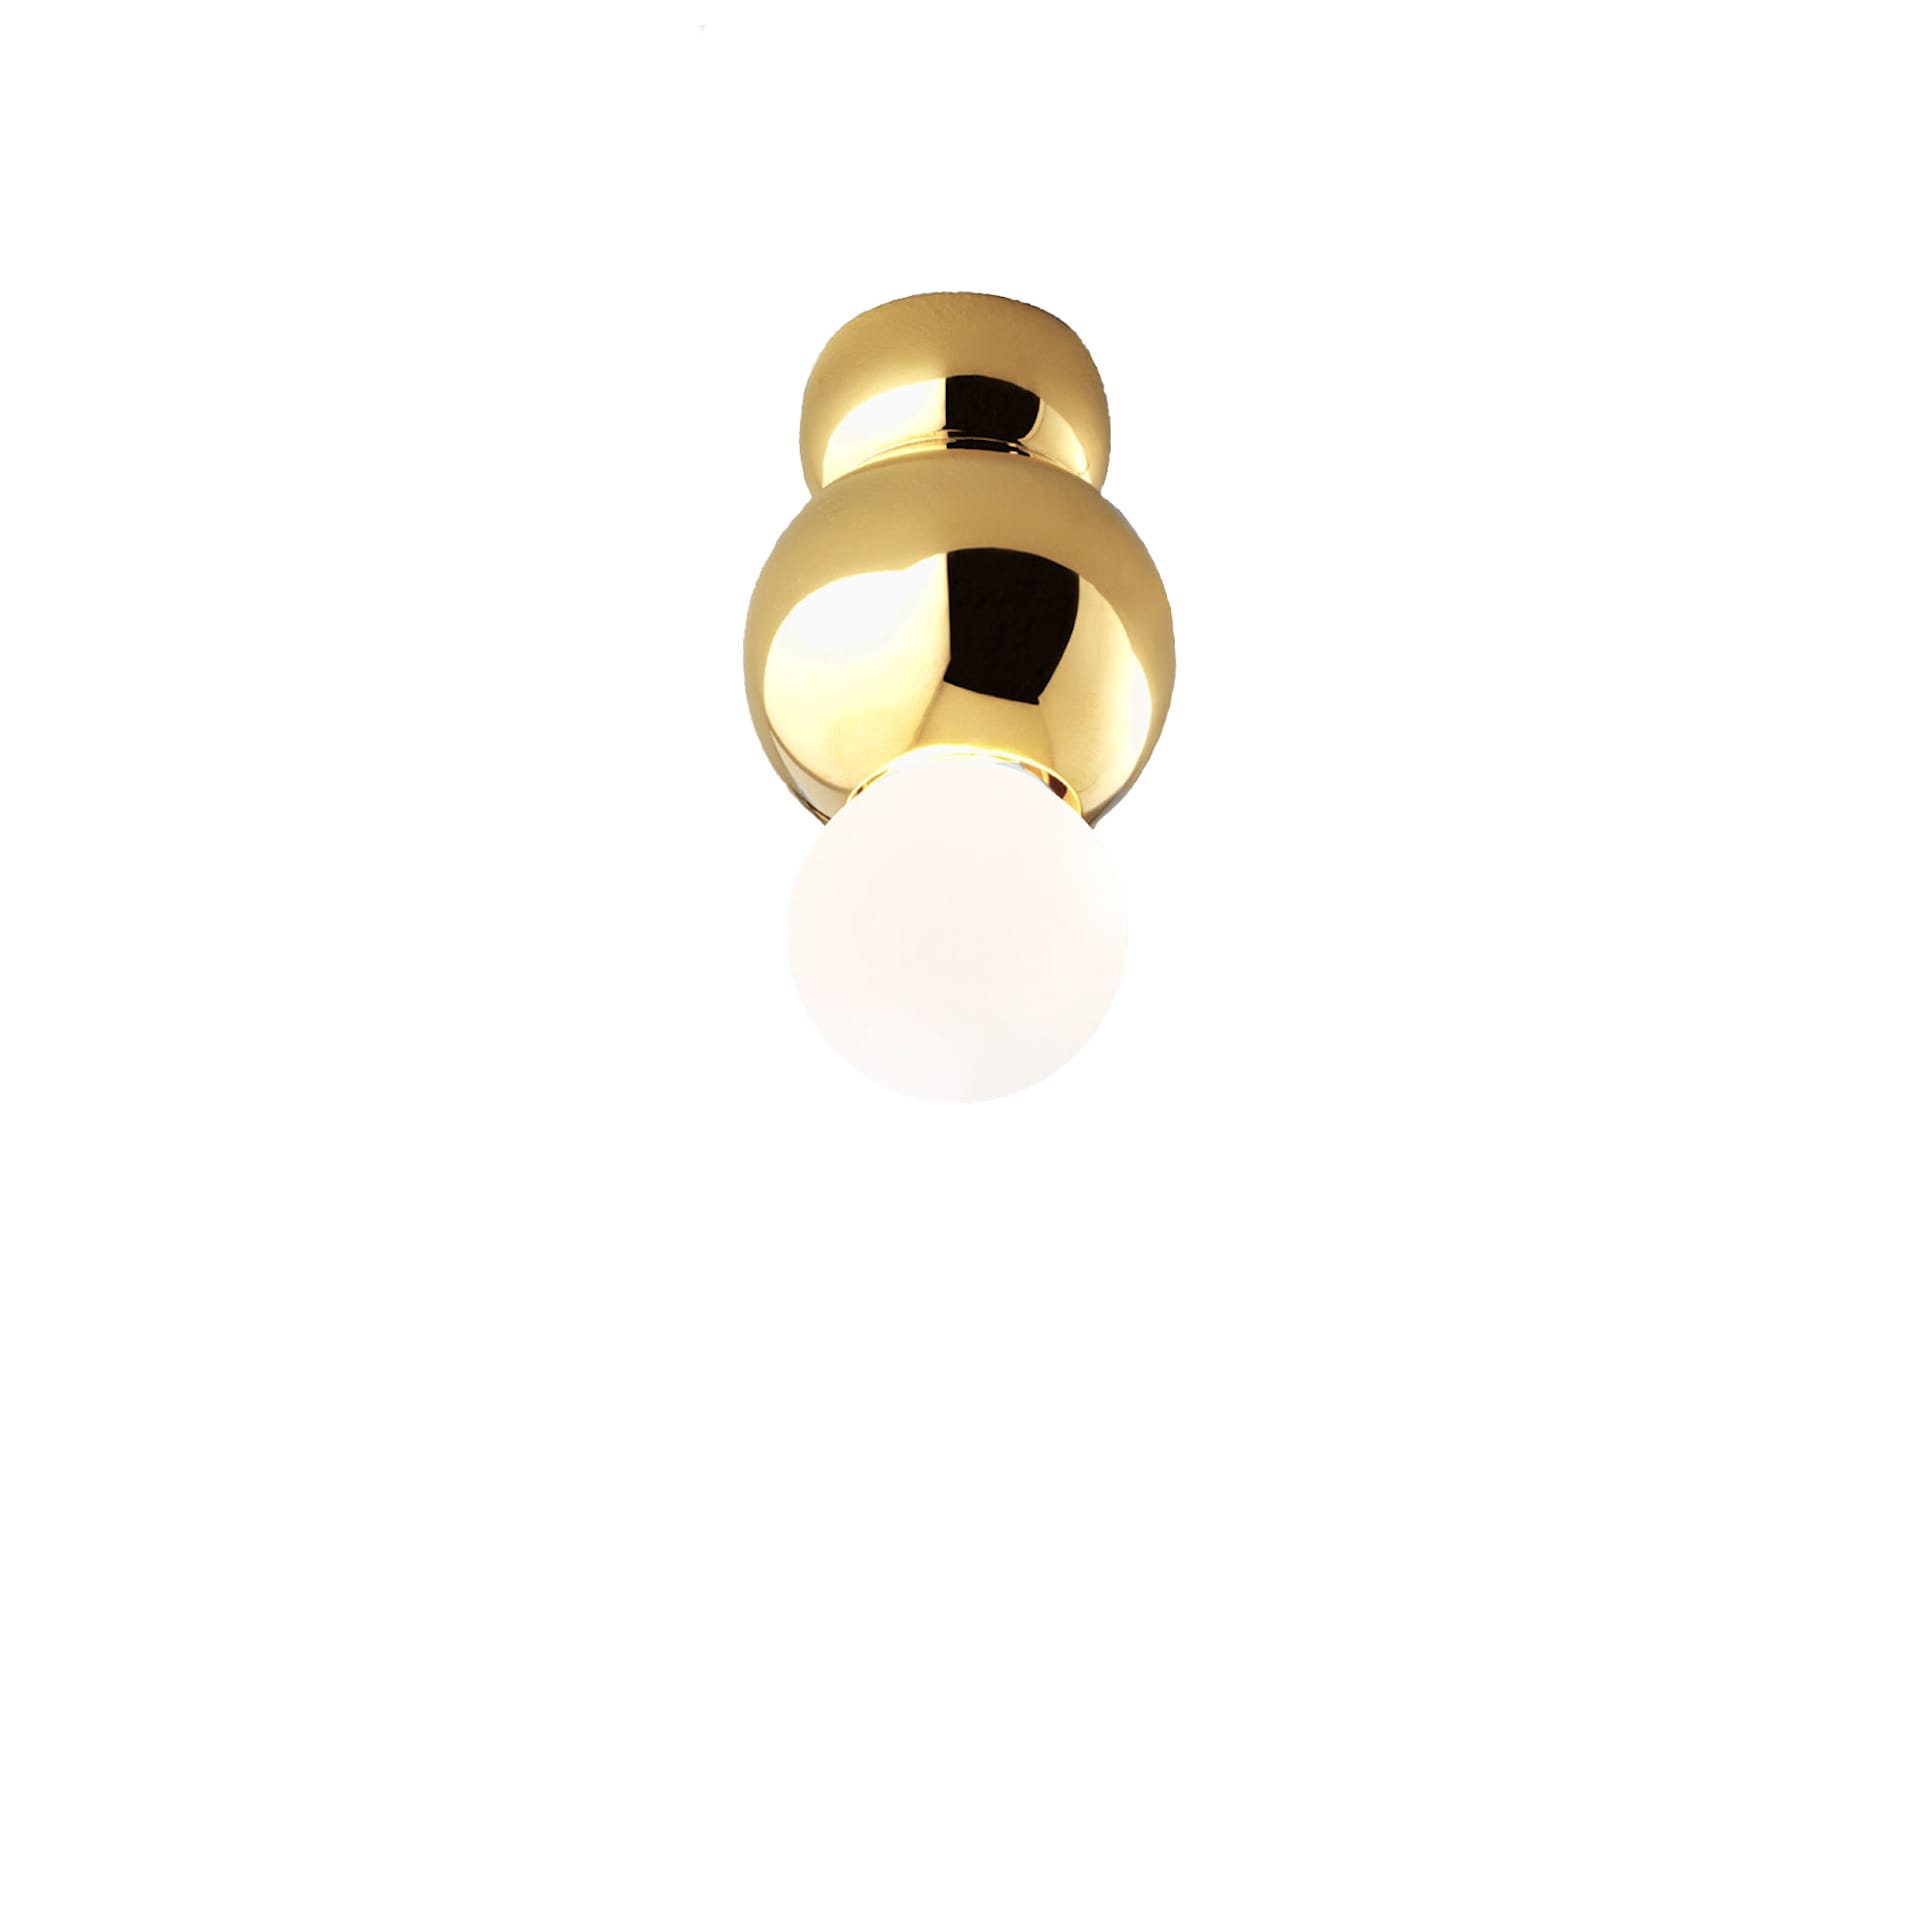 Ball Light Ceiling Polished Brass - Michael Anastassiades - Michael Anastassiades - NO GA